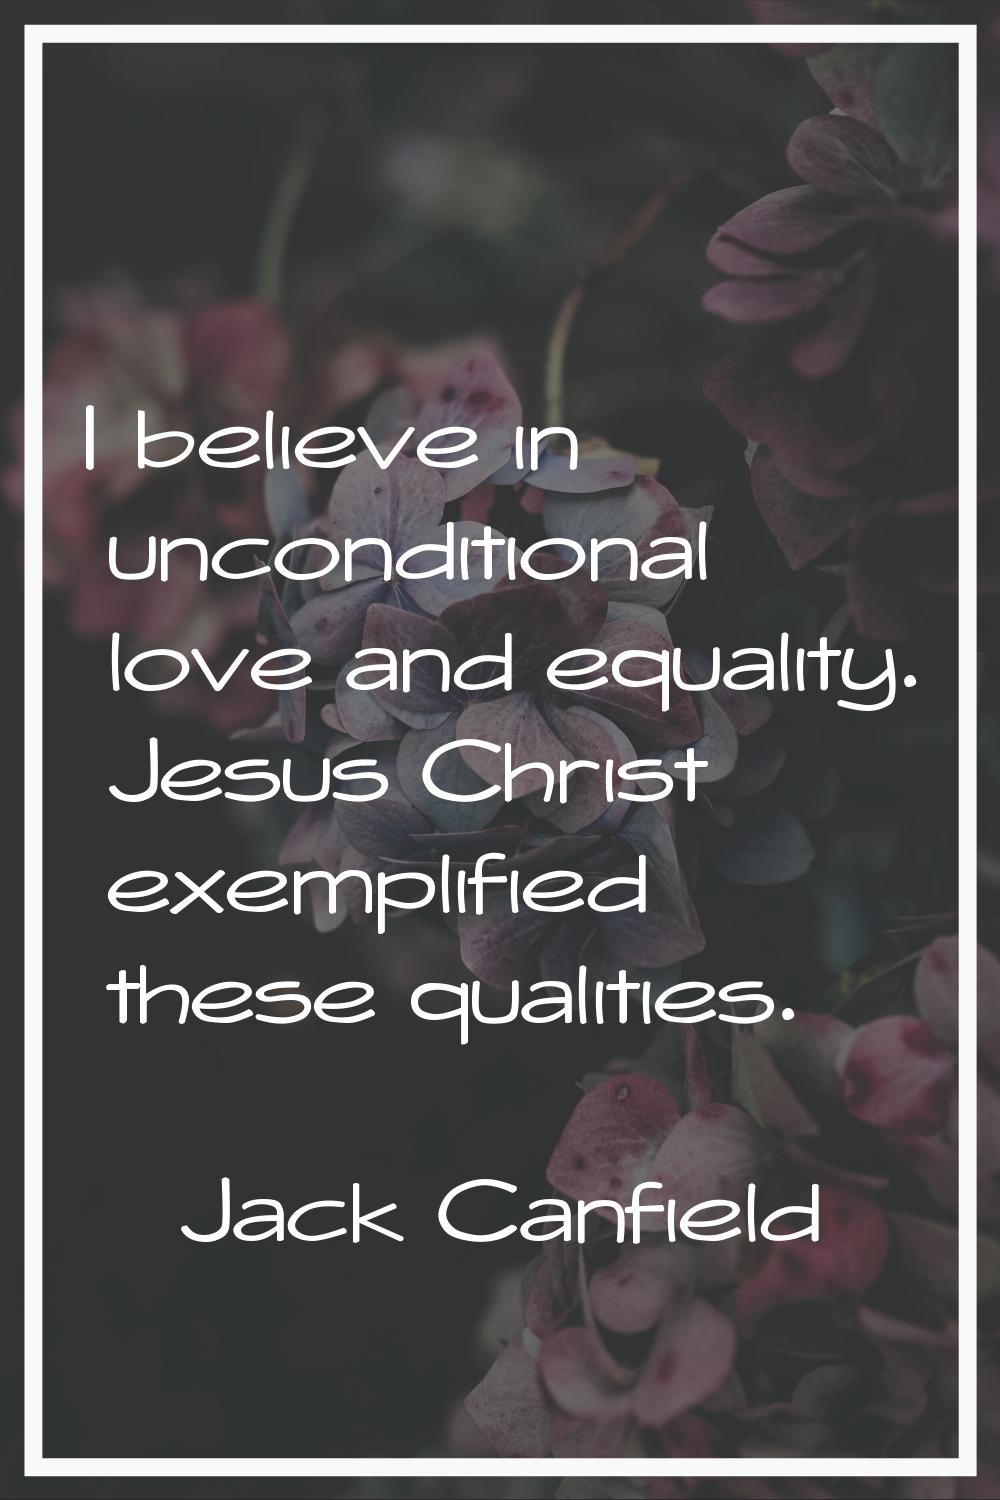 I believe in unconditional love and equality. Jesus Christ exemplified these qualities.